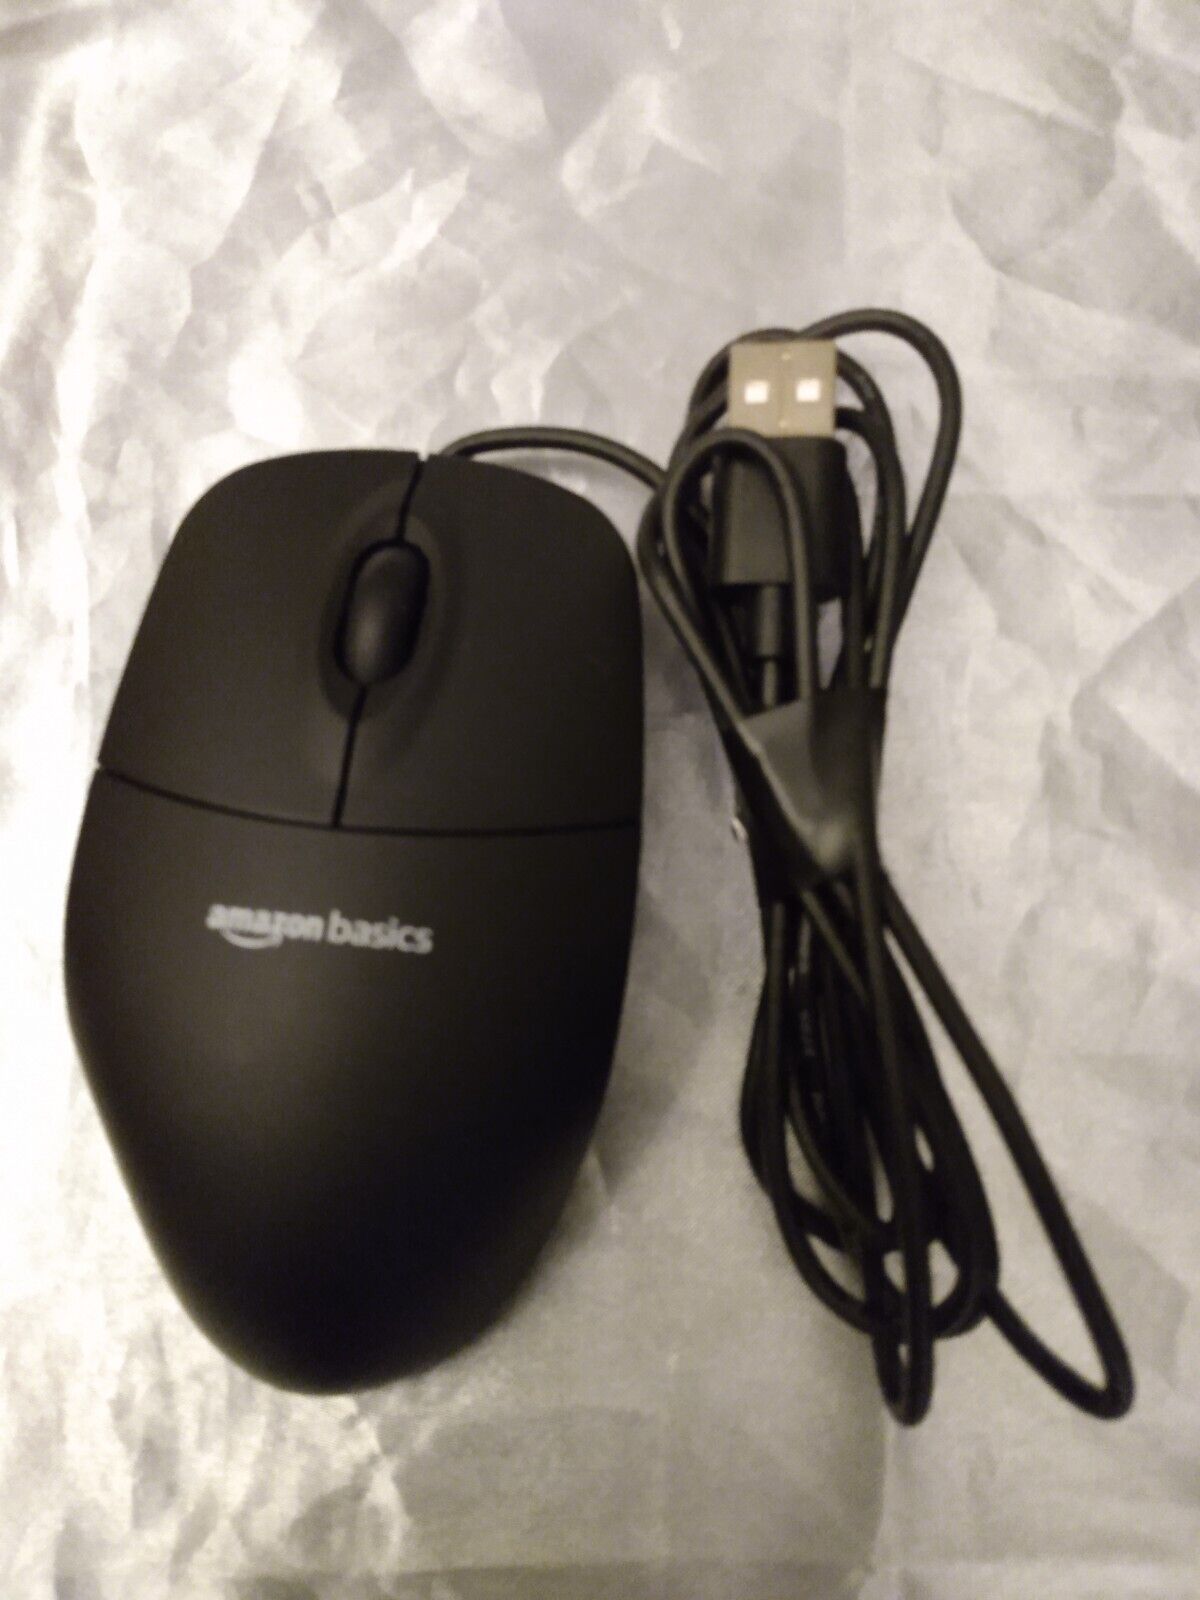 AmazonBasics 3-Button USB Wired Computer Mouse (Black) - Unused, Excellent